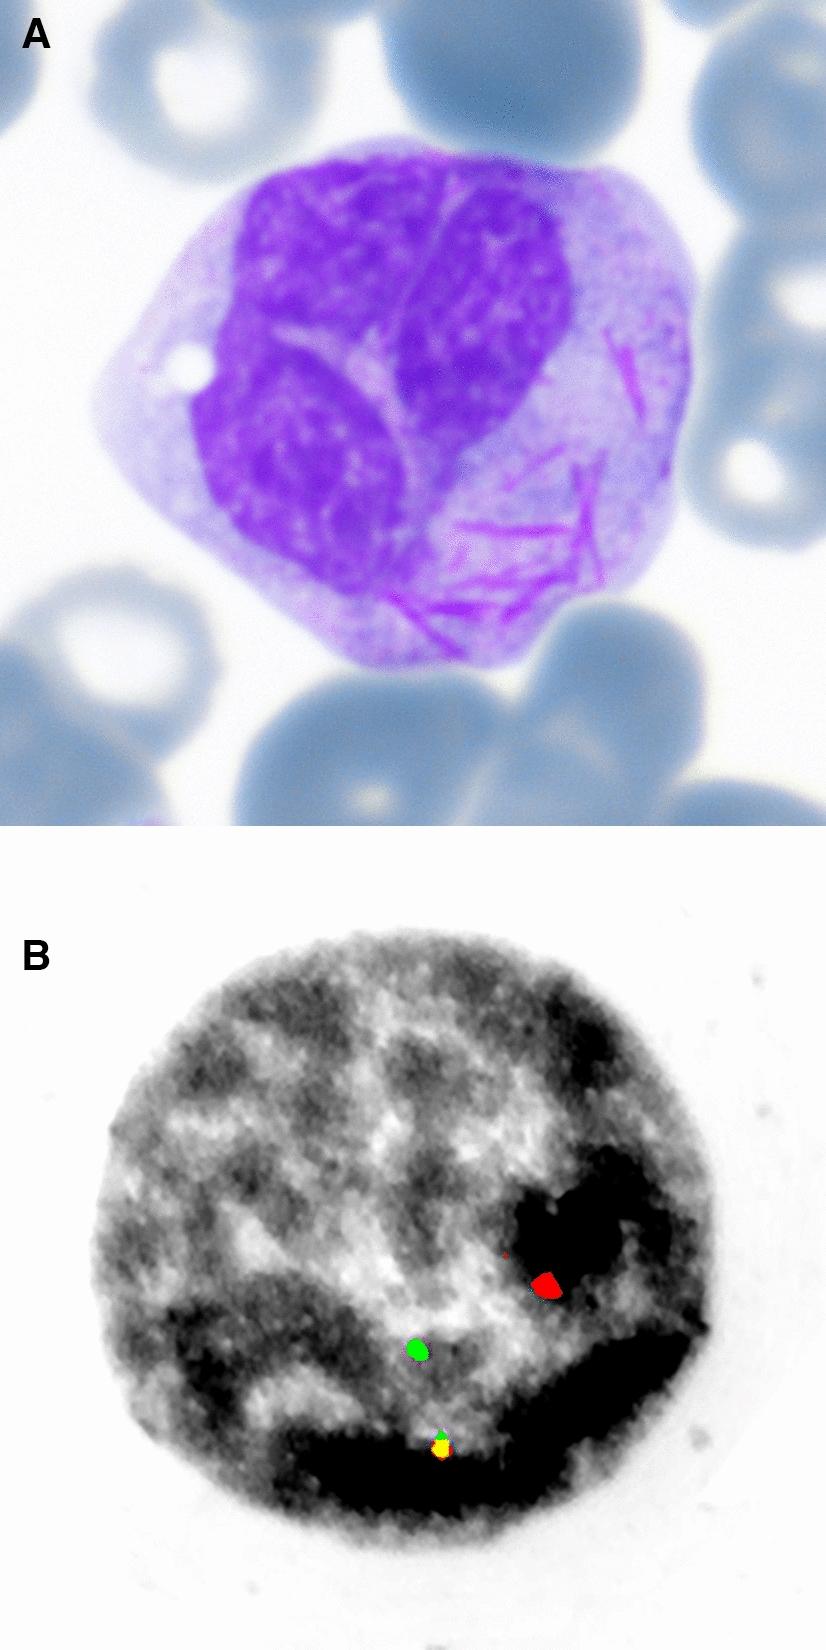 Auer rods in mature granulocytes in peripheral blood